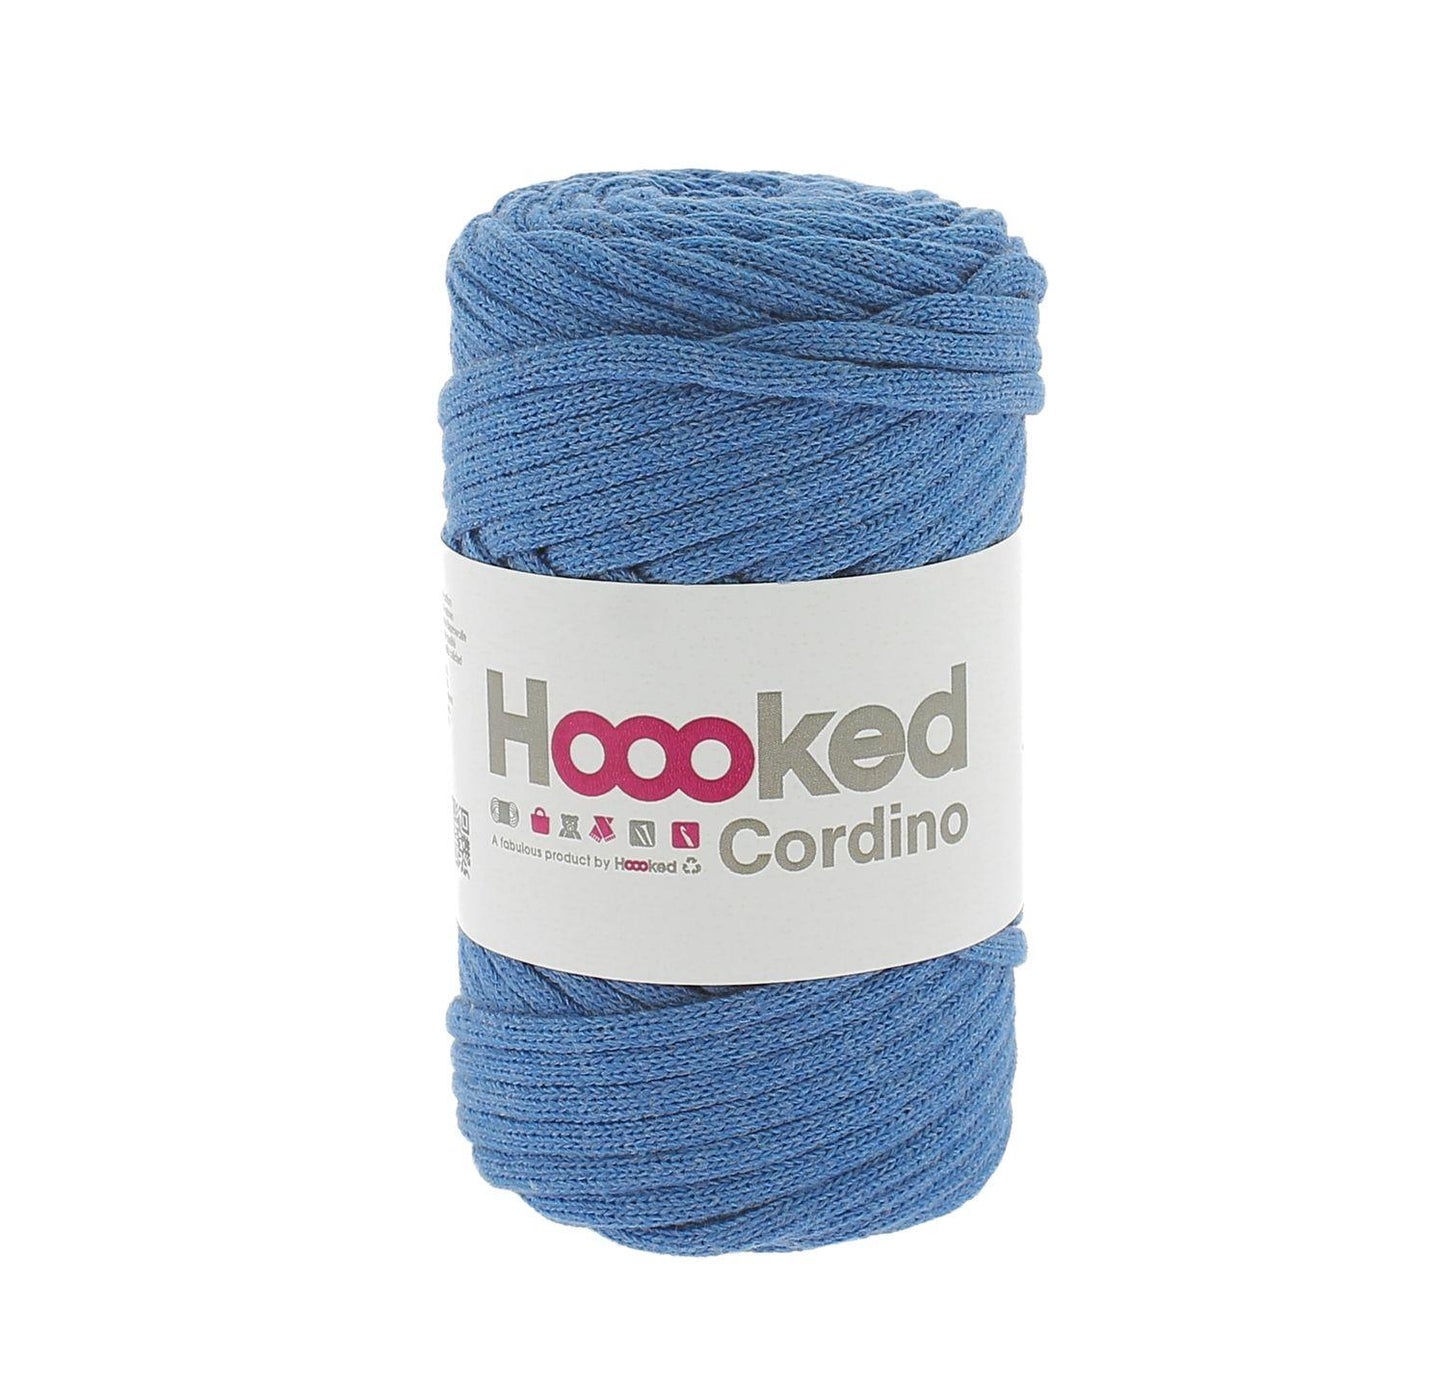 [Hoooked] Cordino Imperial Blue Cotton Macrame Cord - 54M, 150g